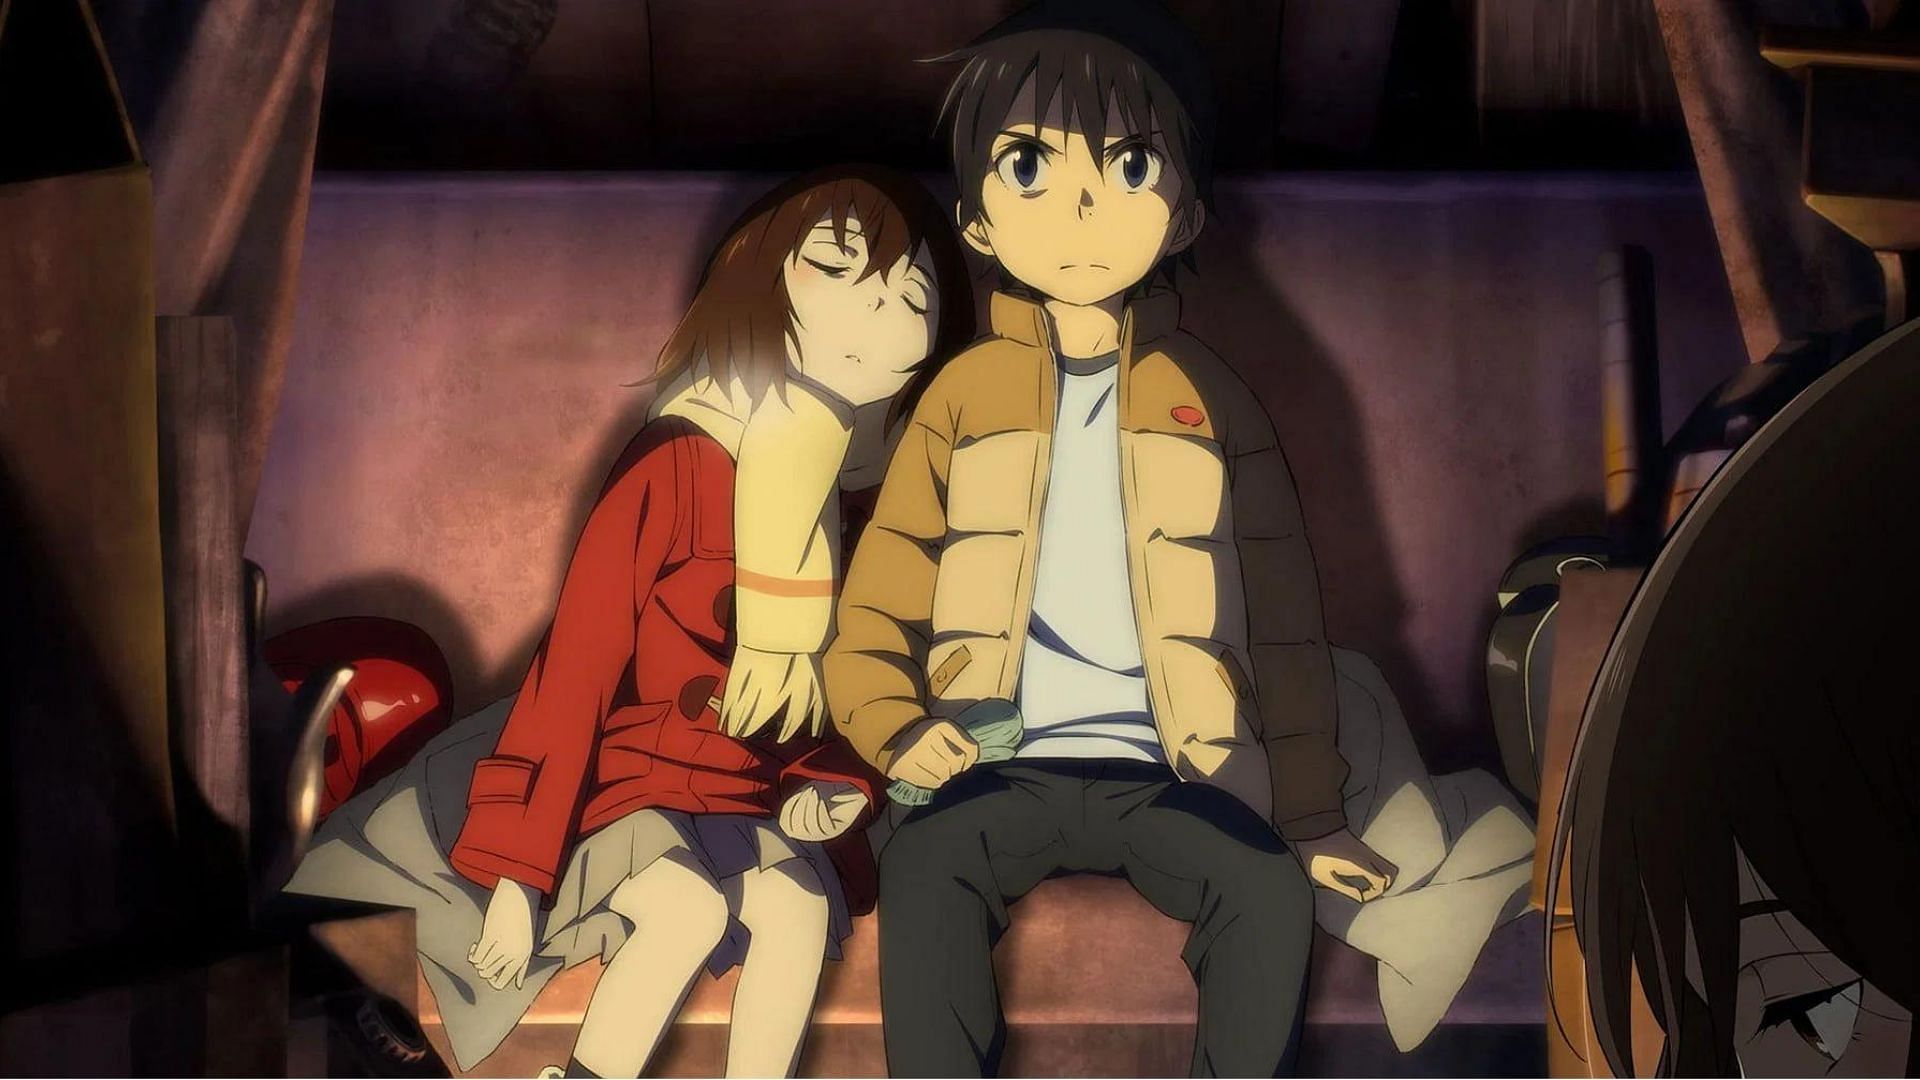 Why the Erased Ending Is Controversial